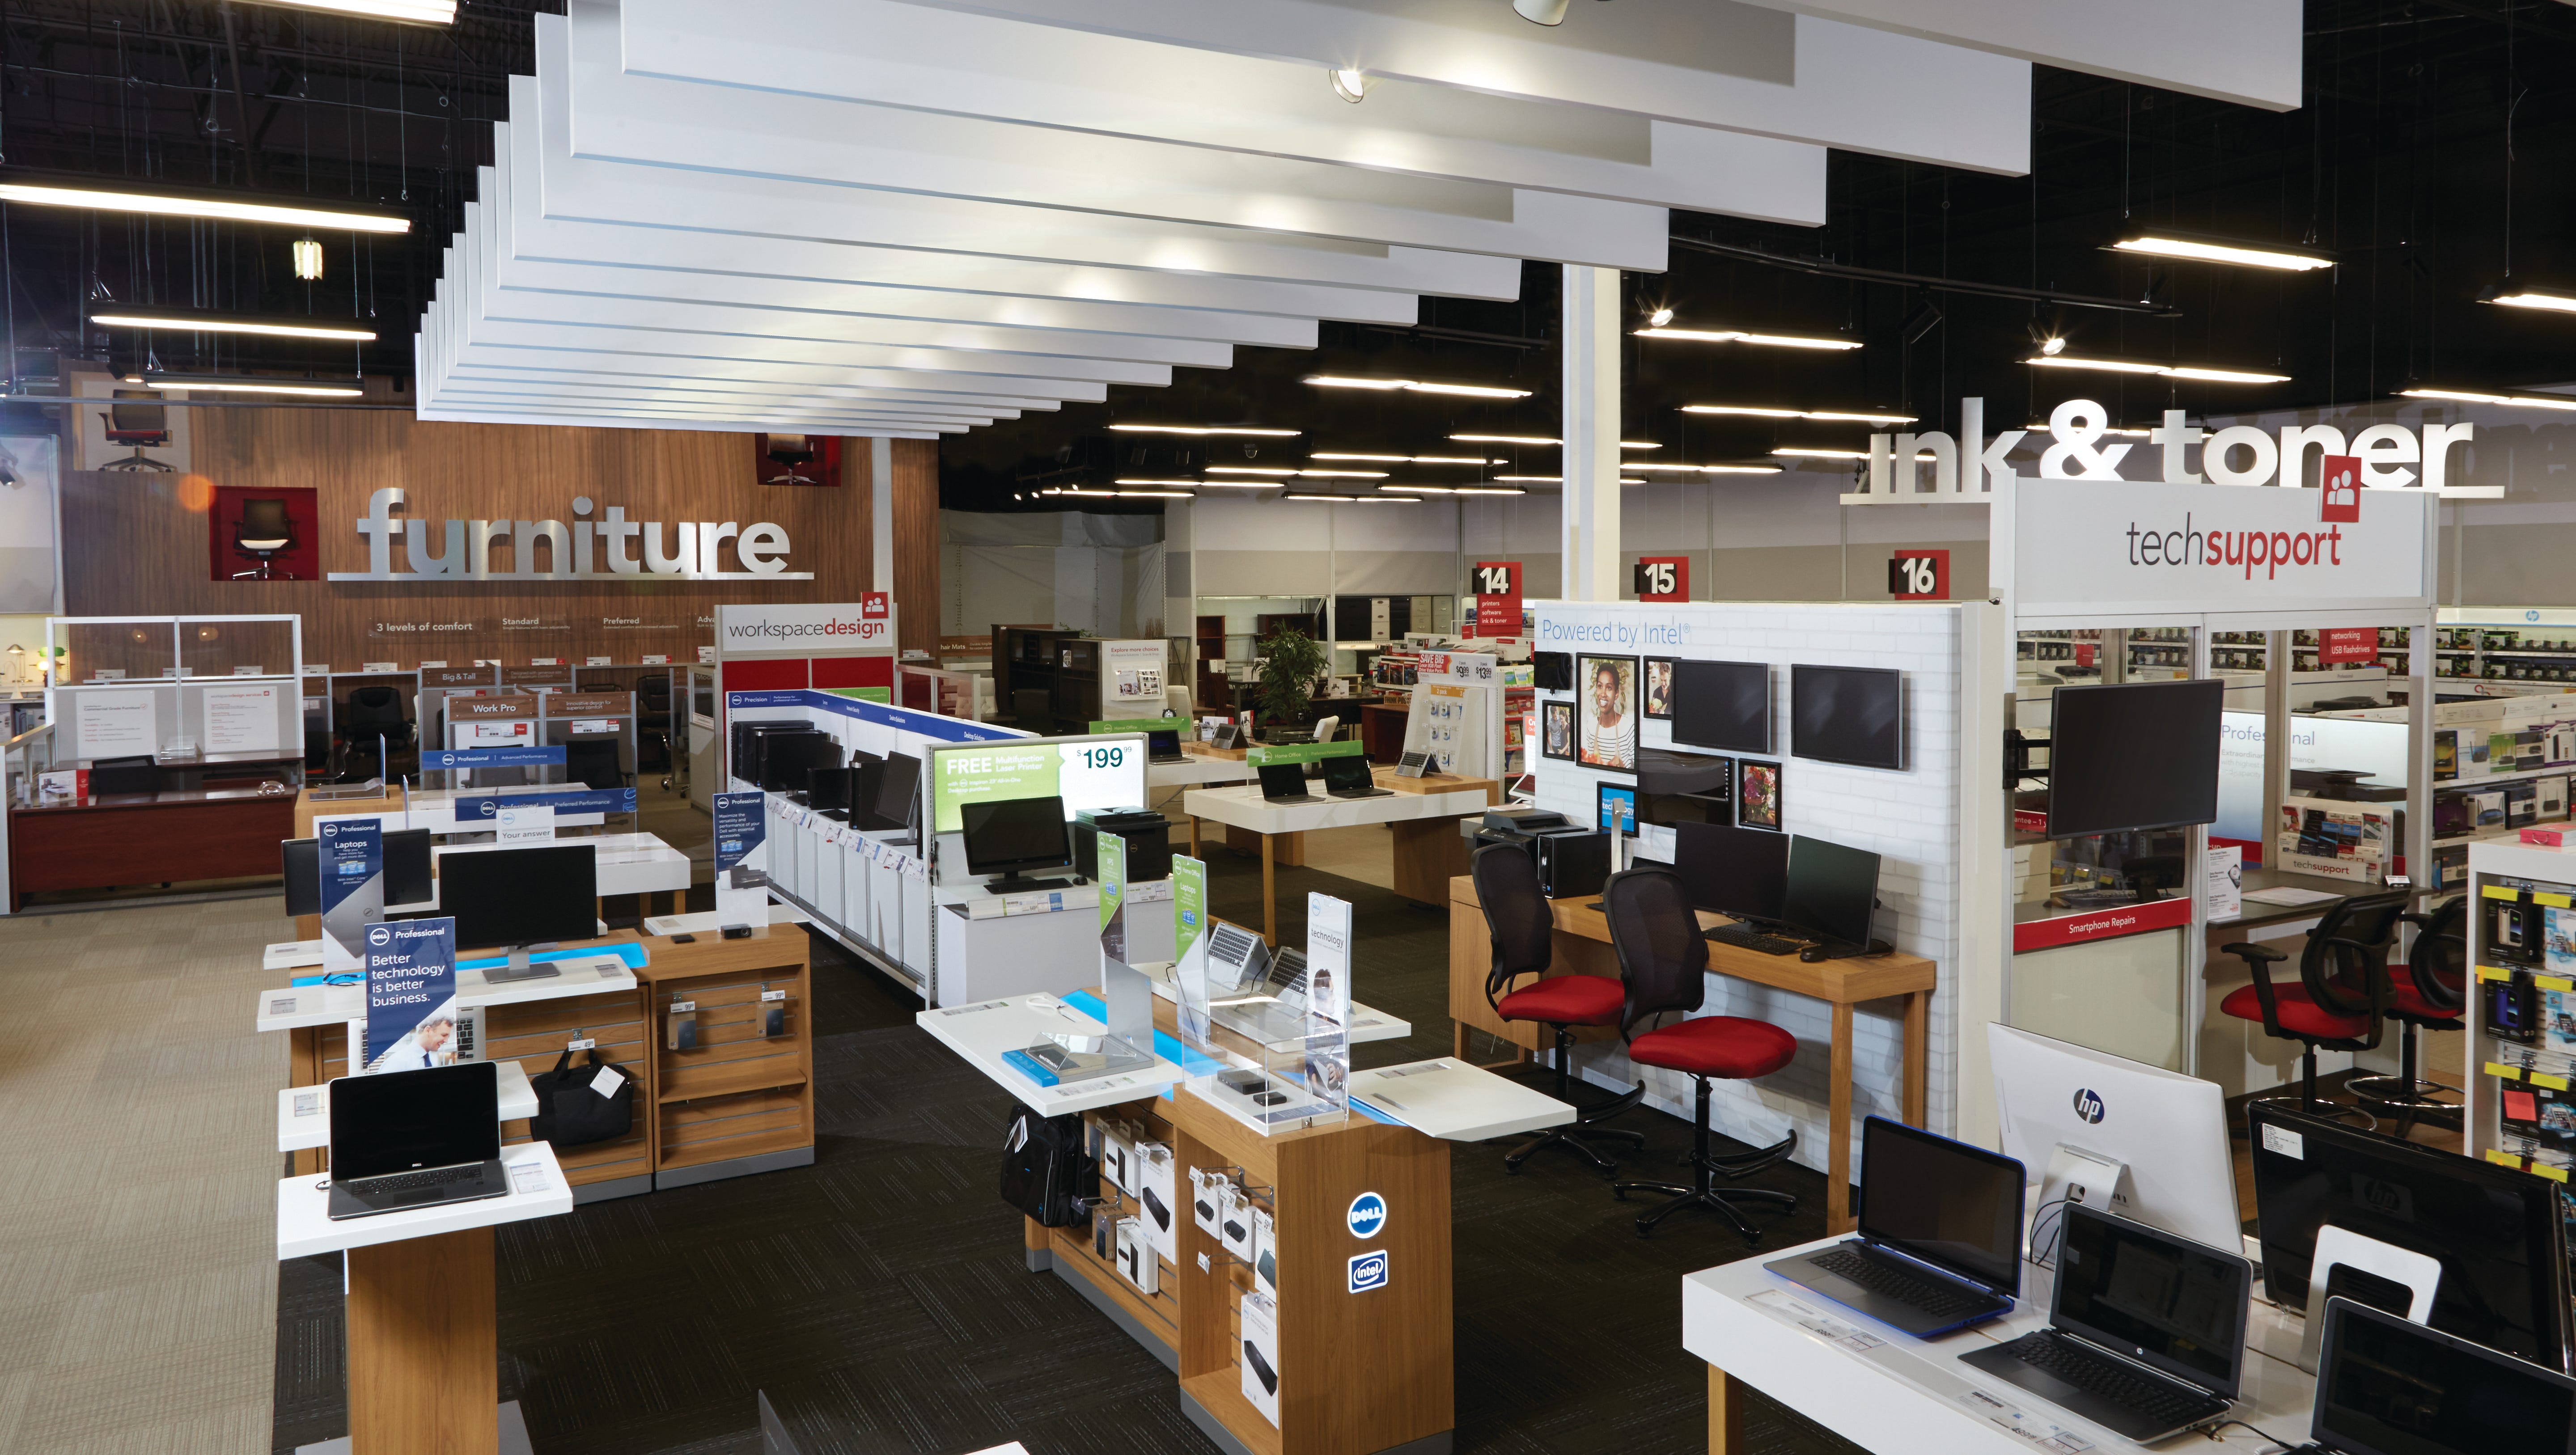 Office Depot remodels for 'store of the future'